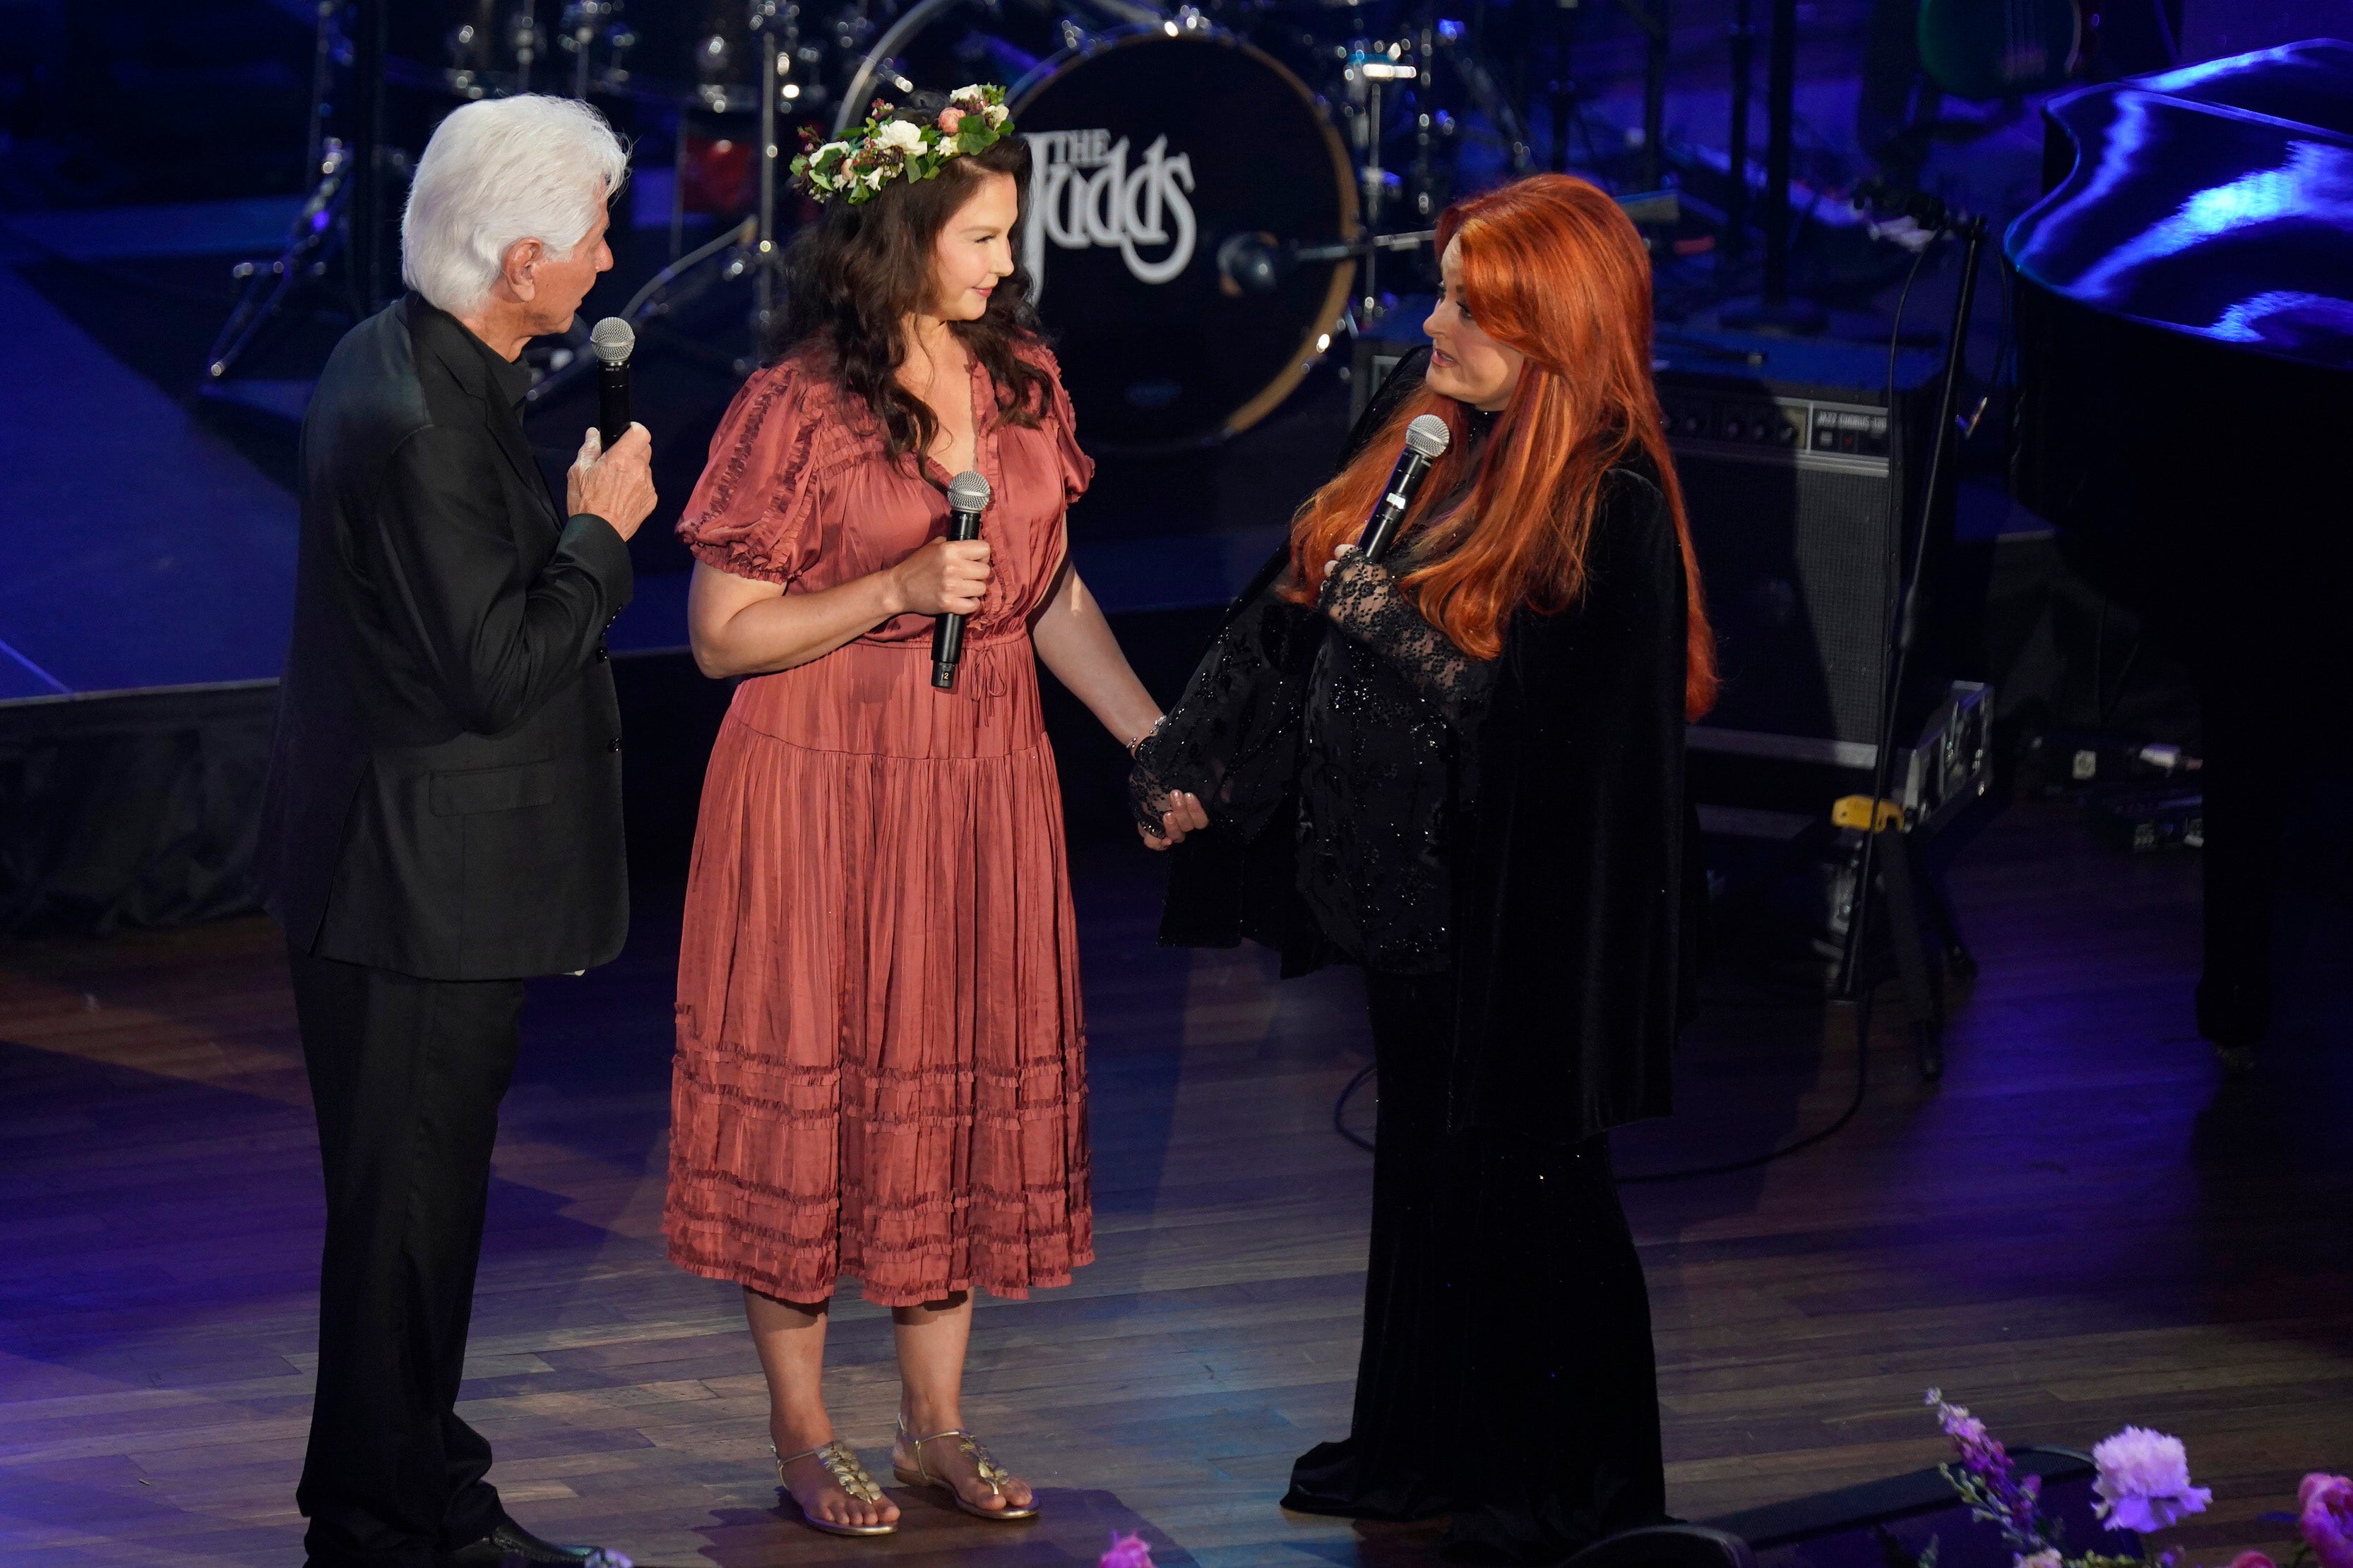 Ashley (centre) and sister Wynonna (right) at a celebration of mother Naomi Judd’s life